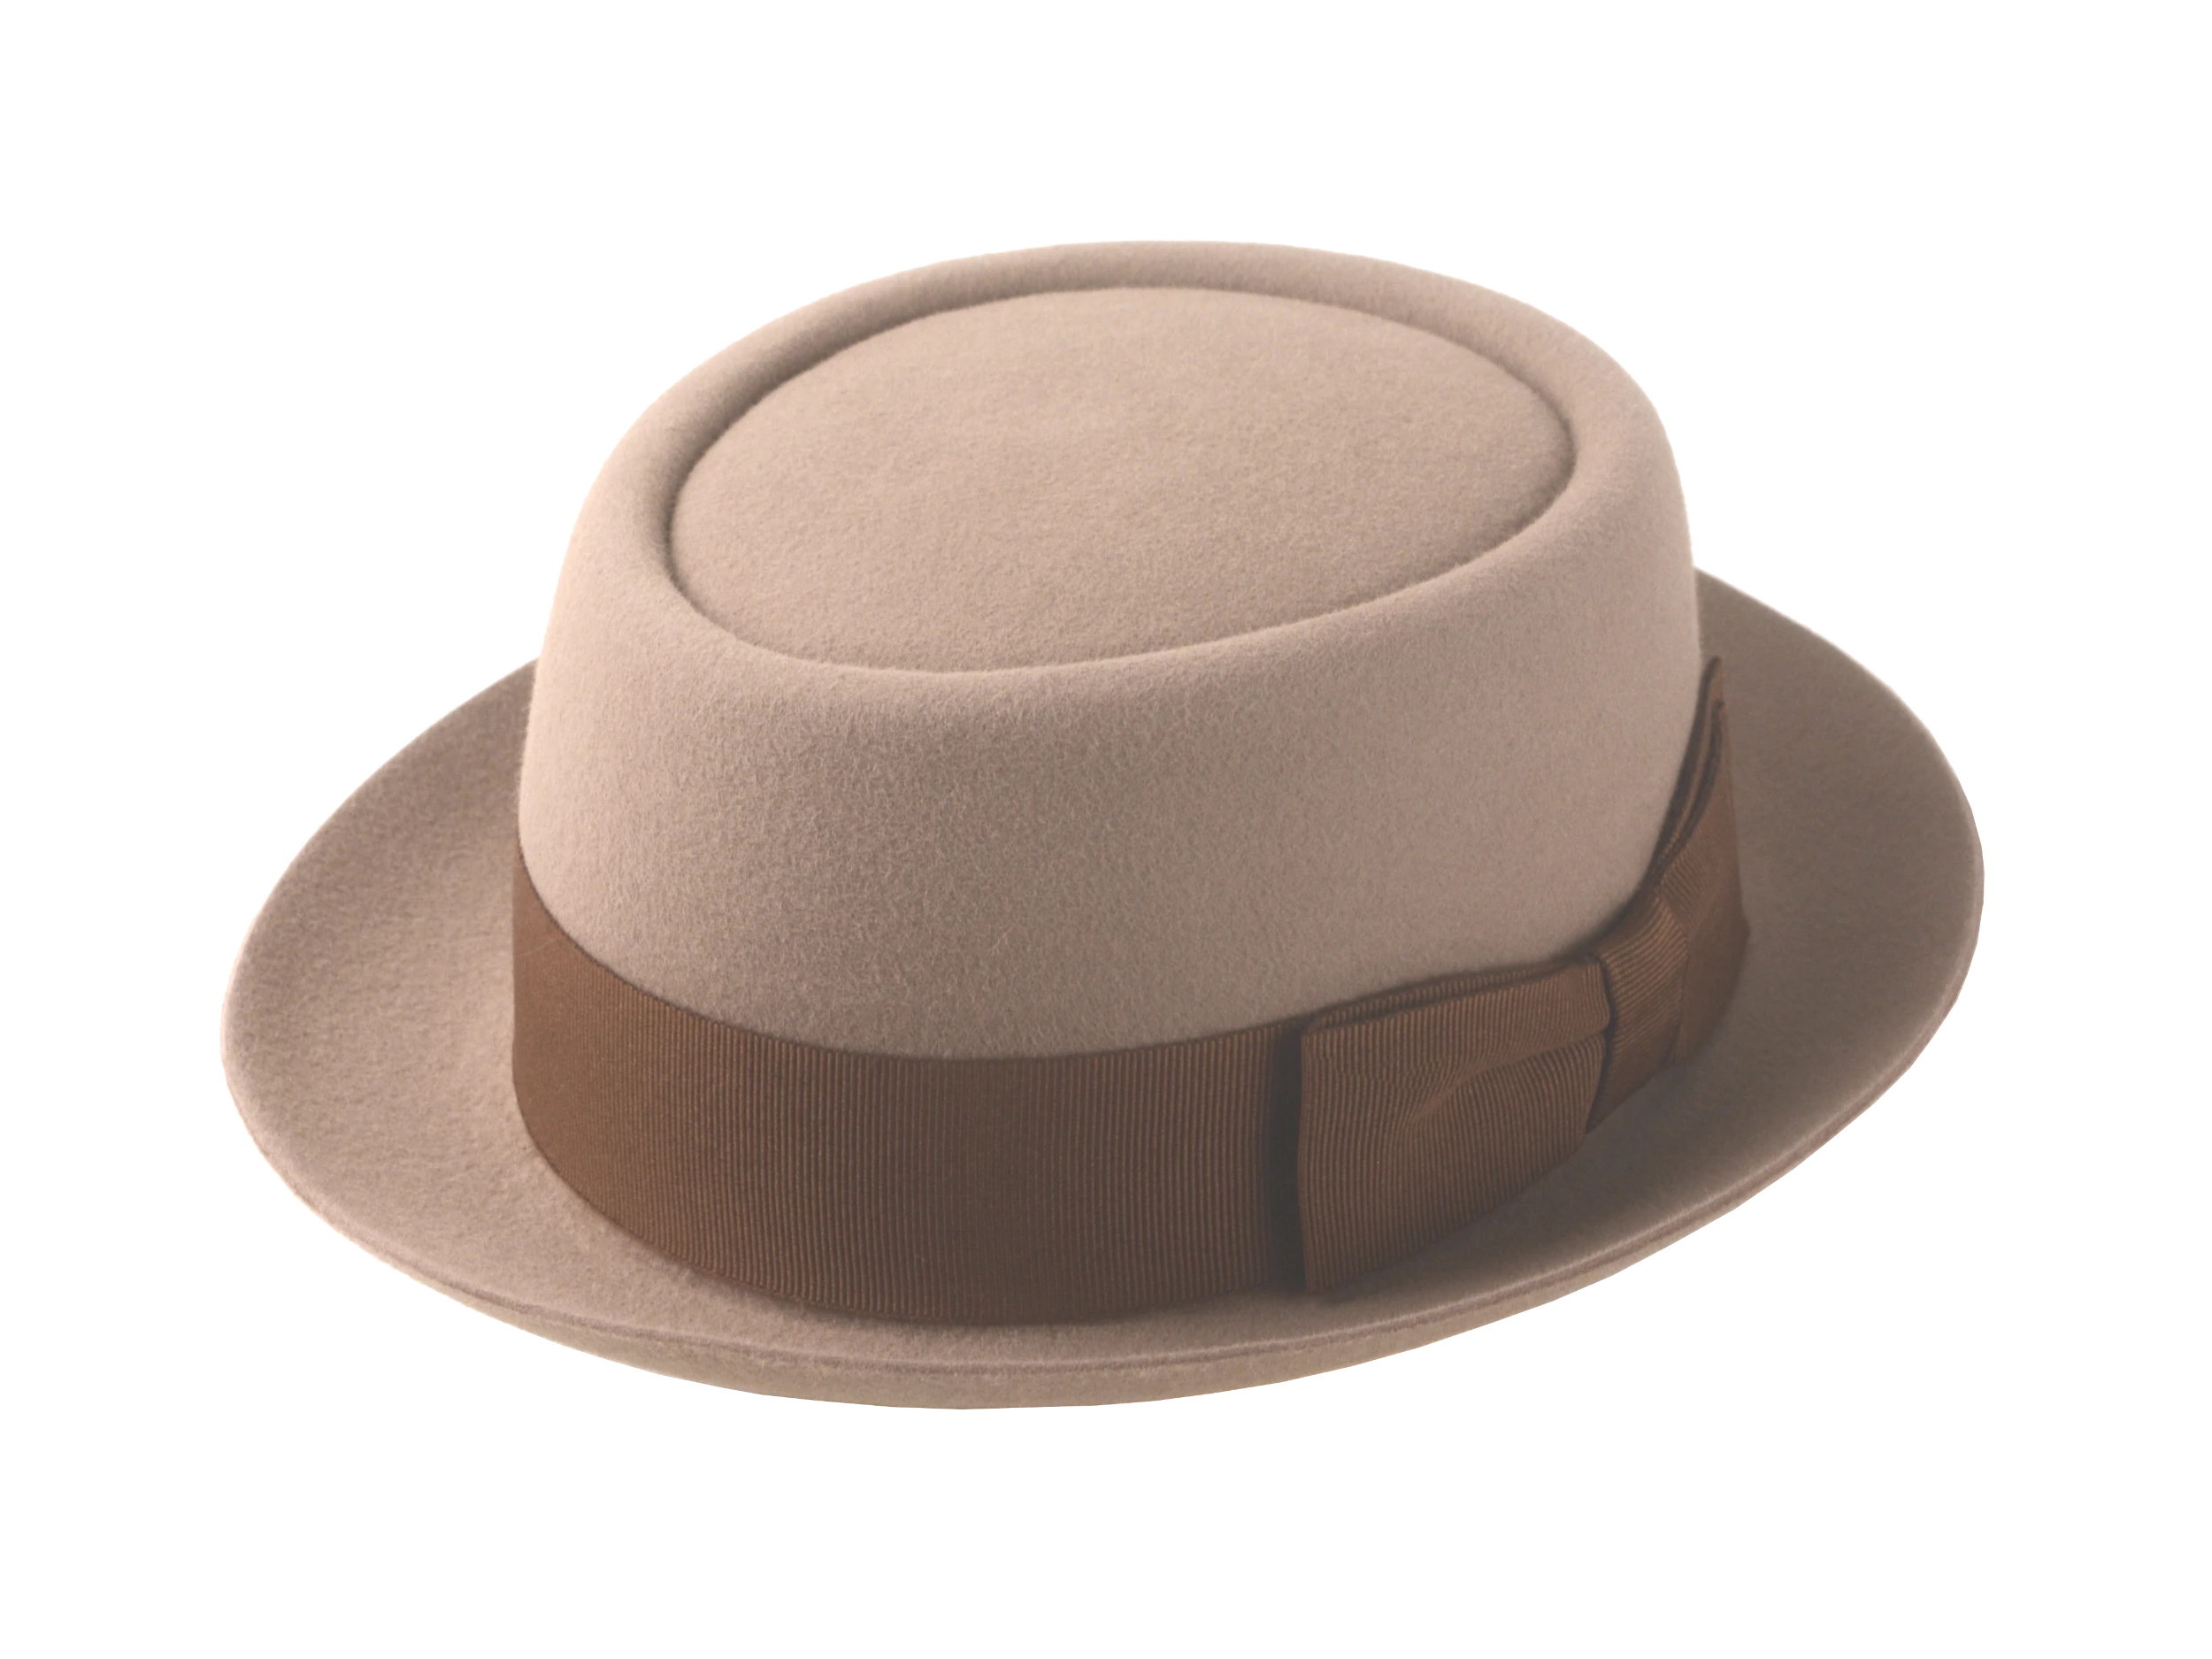 The Soul: Highlighting the hat’s overall shape and classic style | Agnoulita Hats